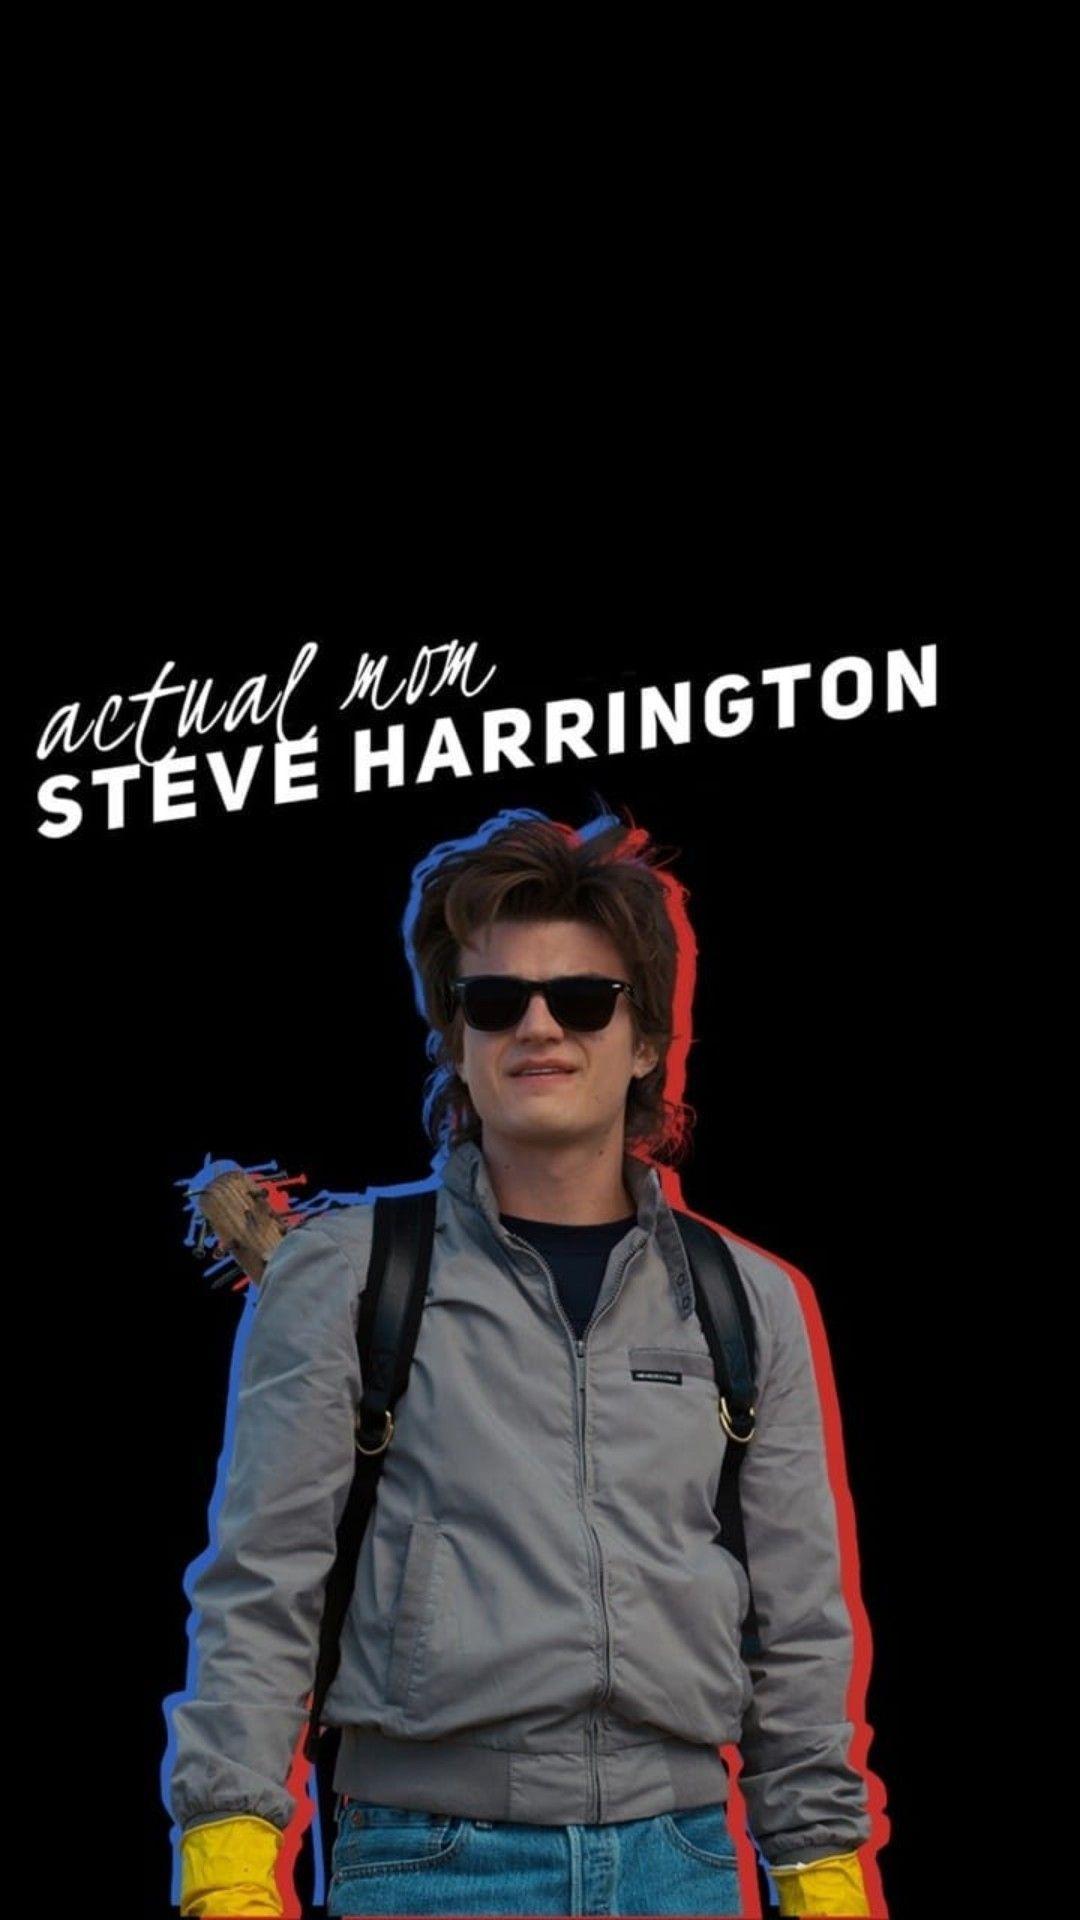 Stunning Steve Harrington Wallpapers Free Download  Every Stranger Things  Fan Should Have  AMJ